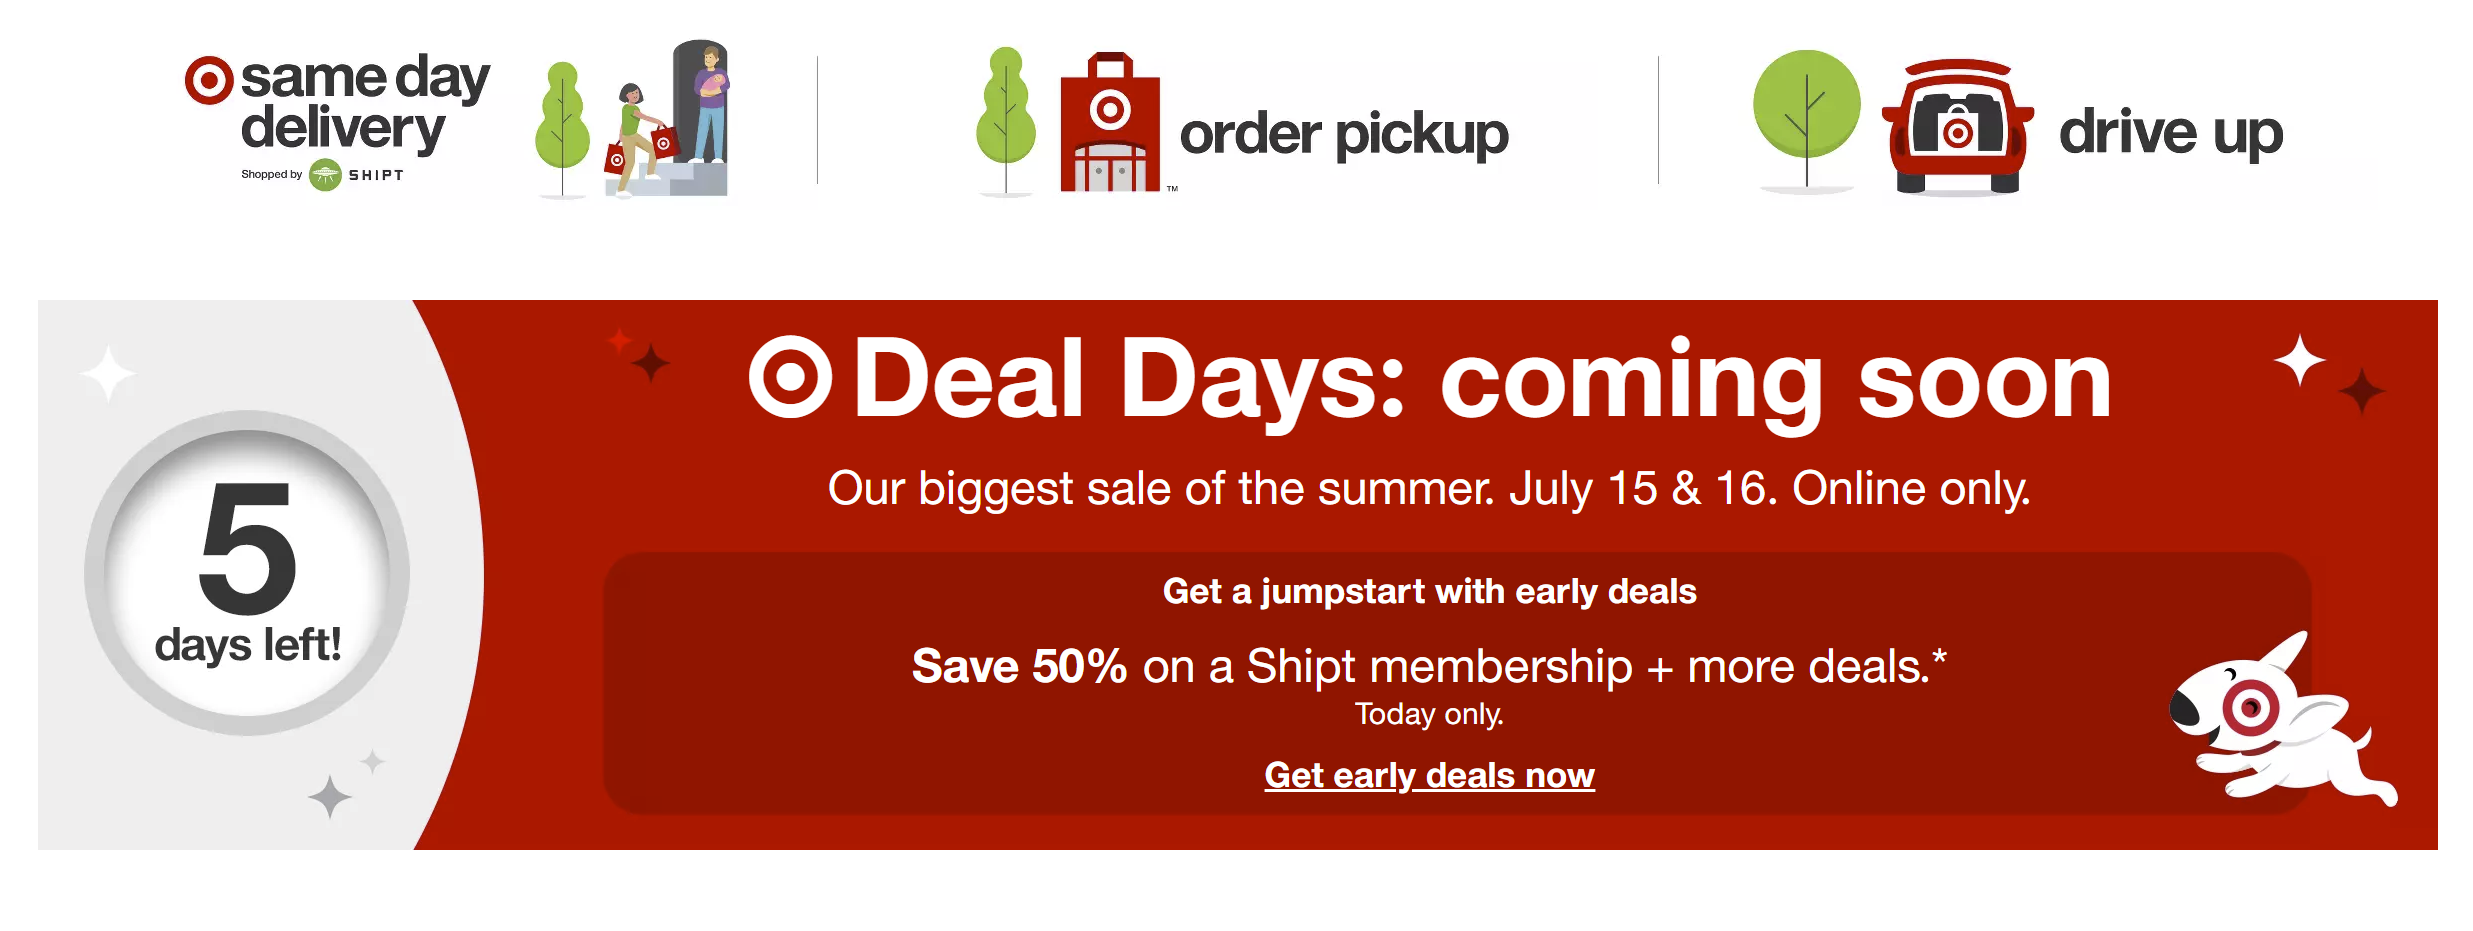 Prime Day 2020 sale: Date, discounts, deals and more